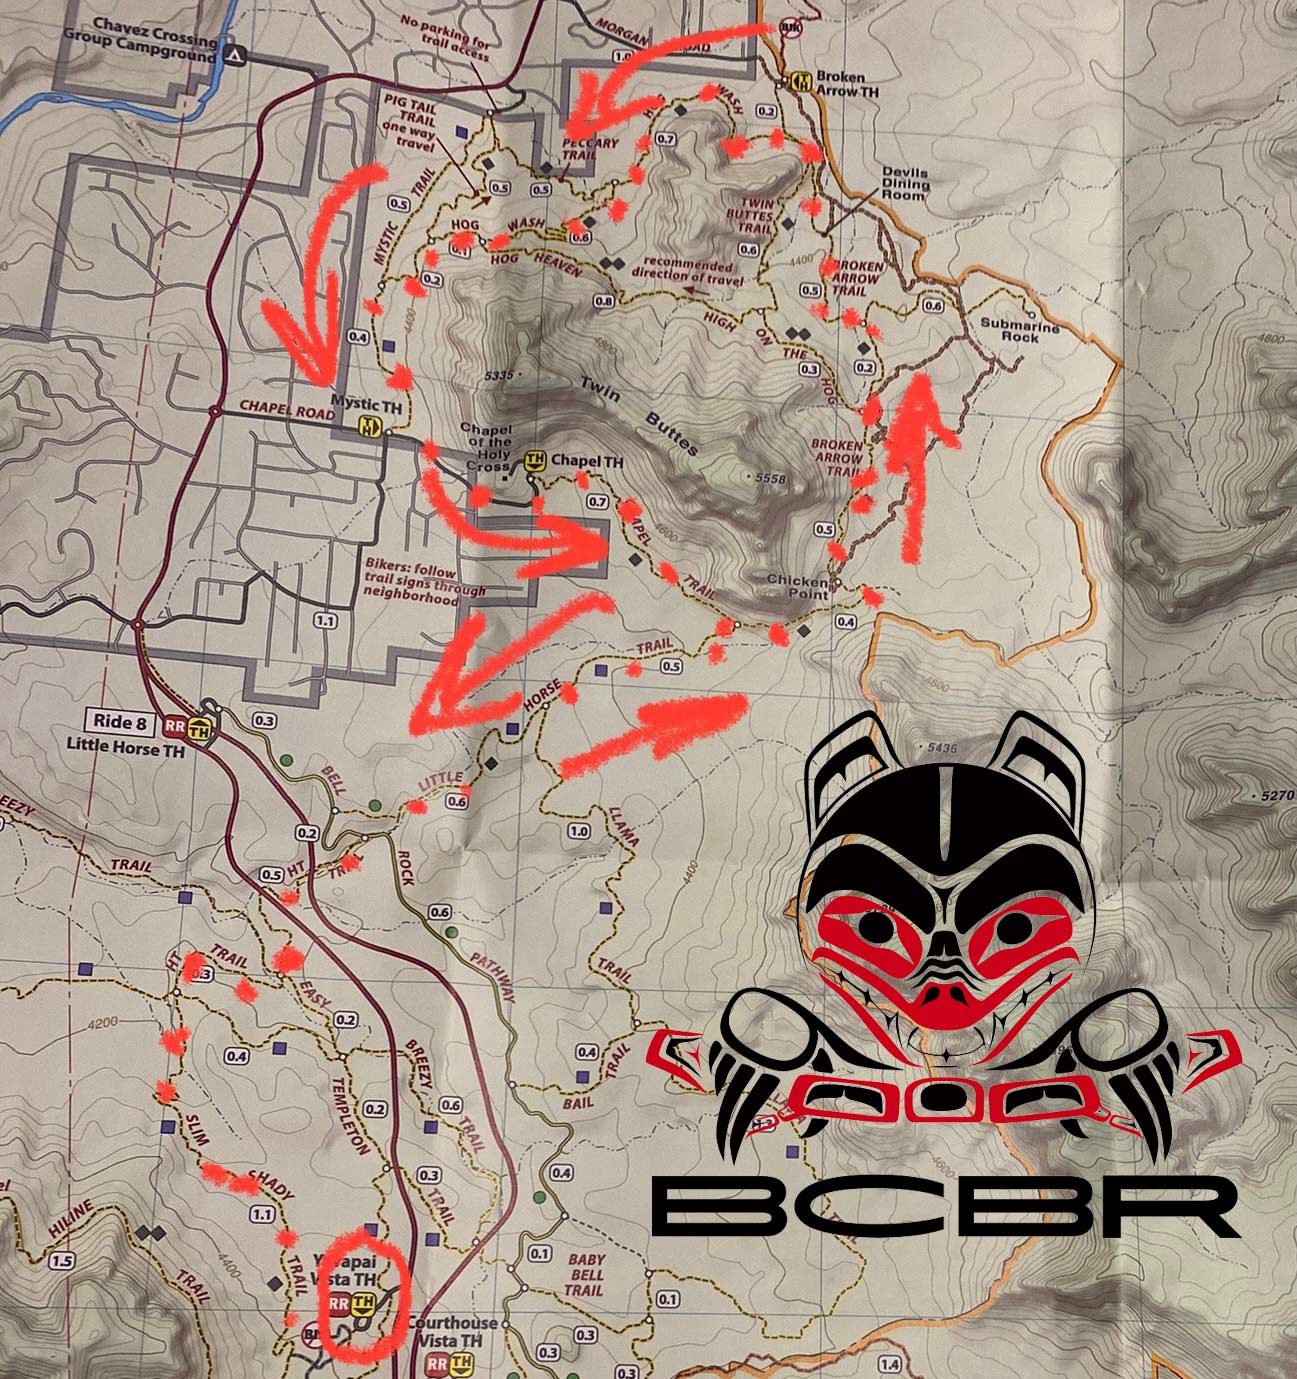 BCBR goes to America, BC Bike Race is moving to the USA for 2022, Sedona route leaked